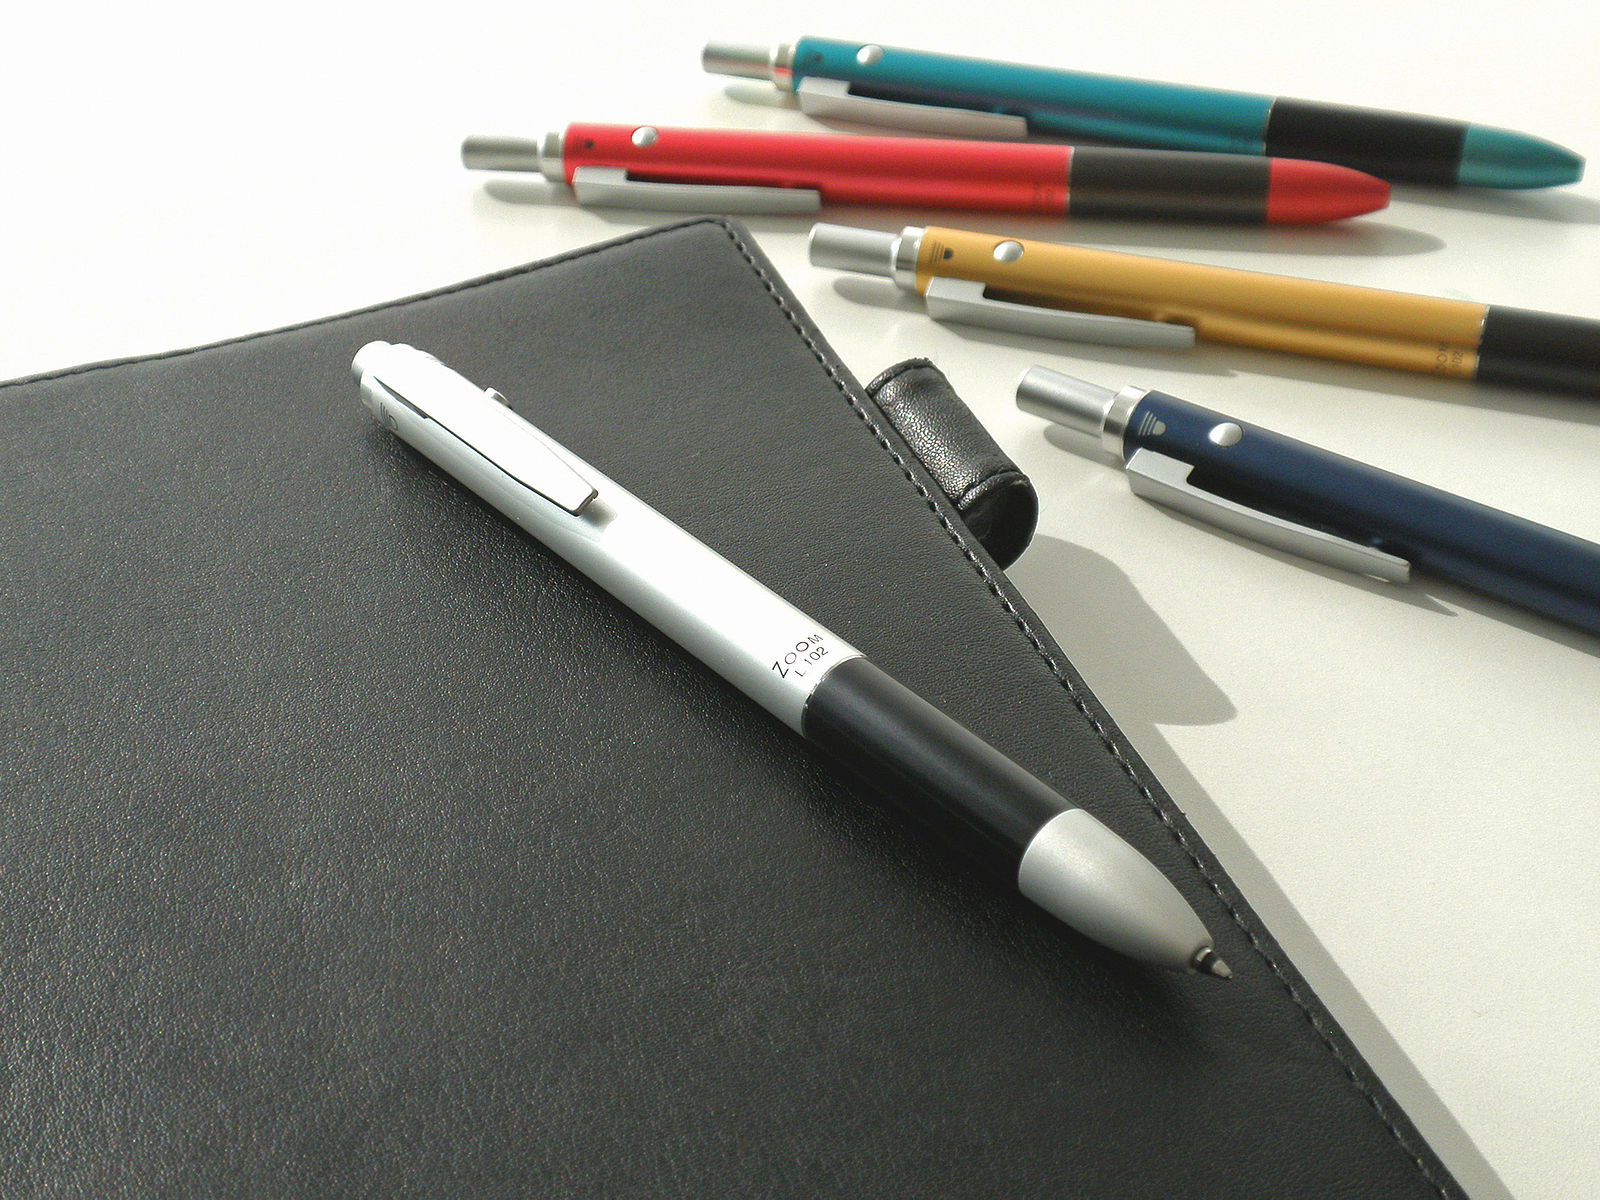 Tips for choosing and using ballpoint pens